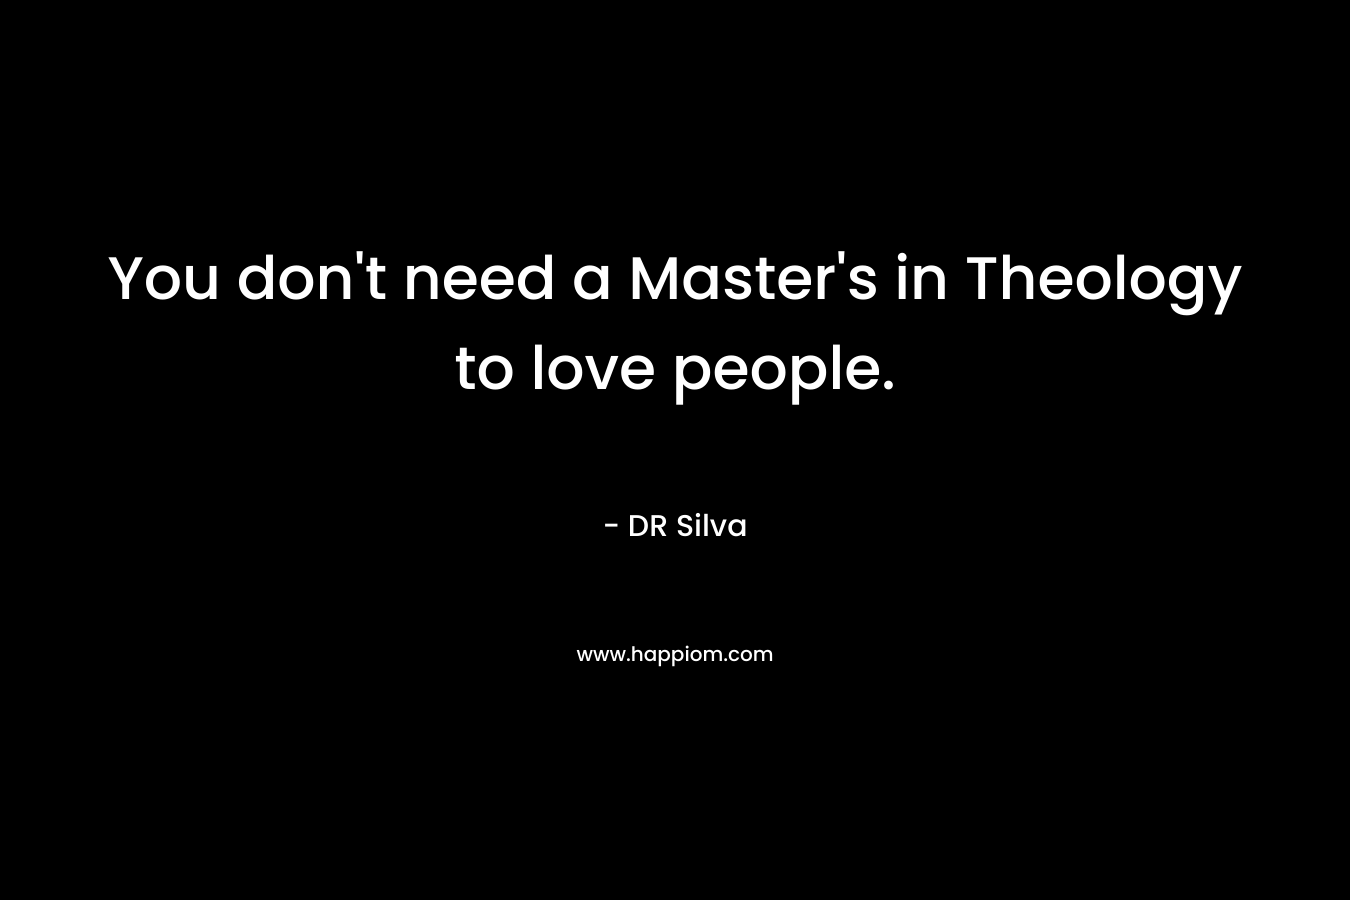 You don't need a Master's in Theology to love people.